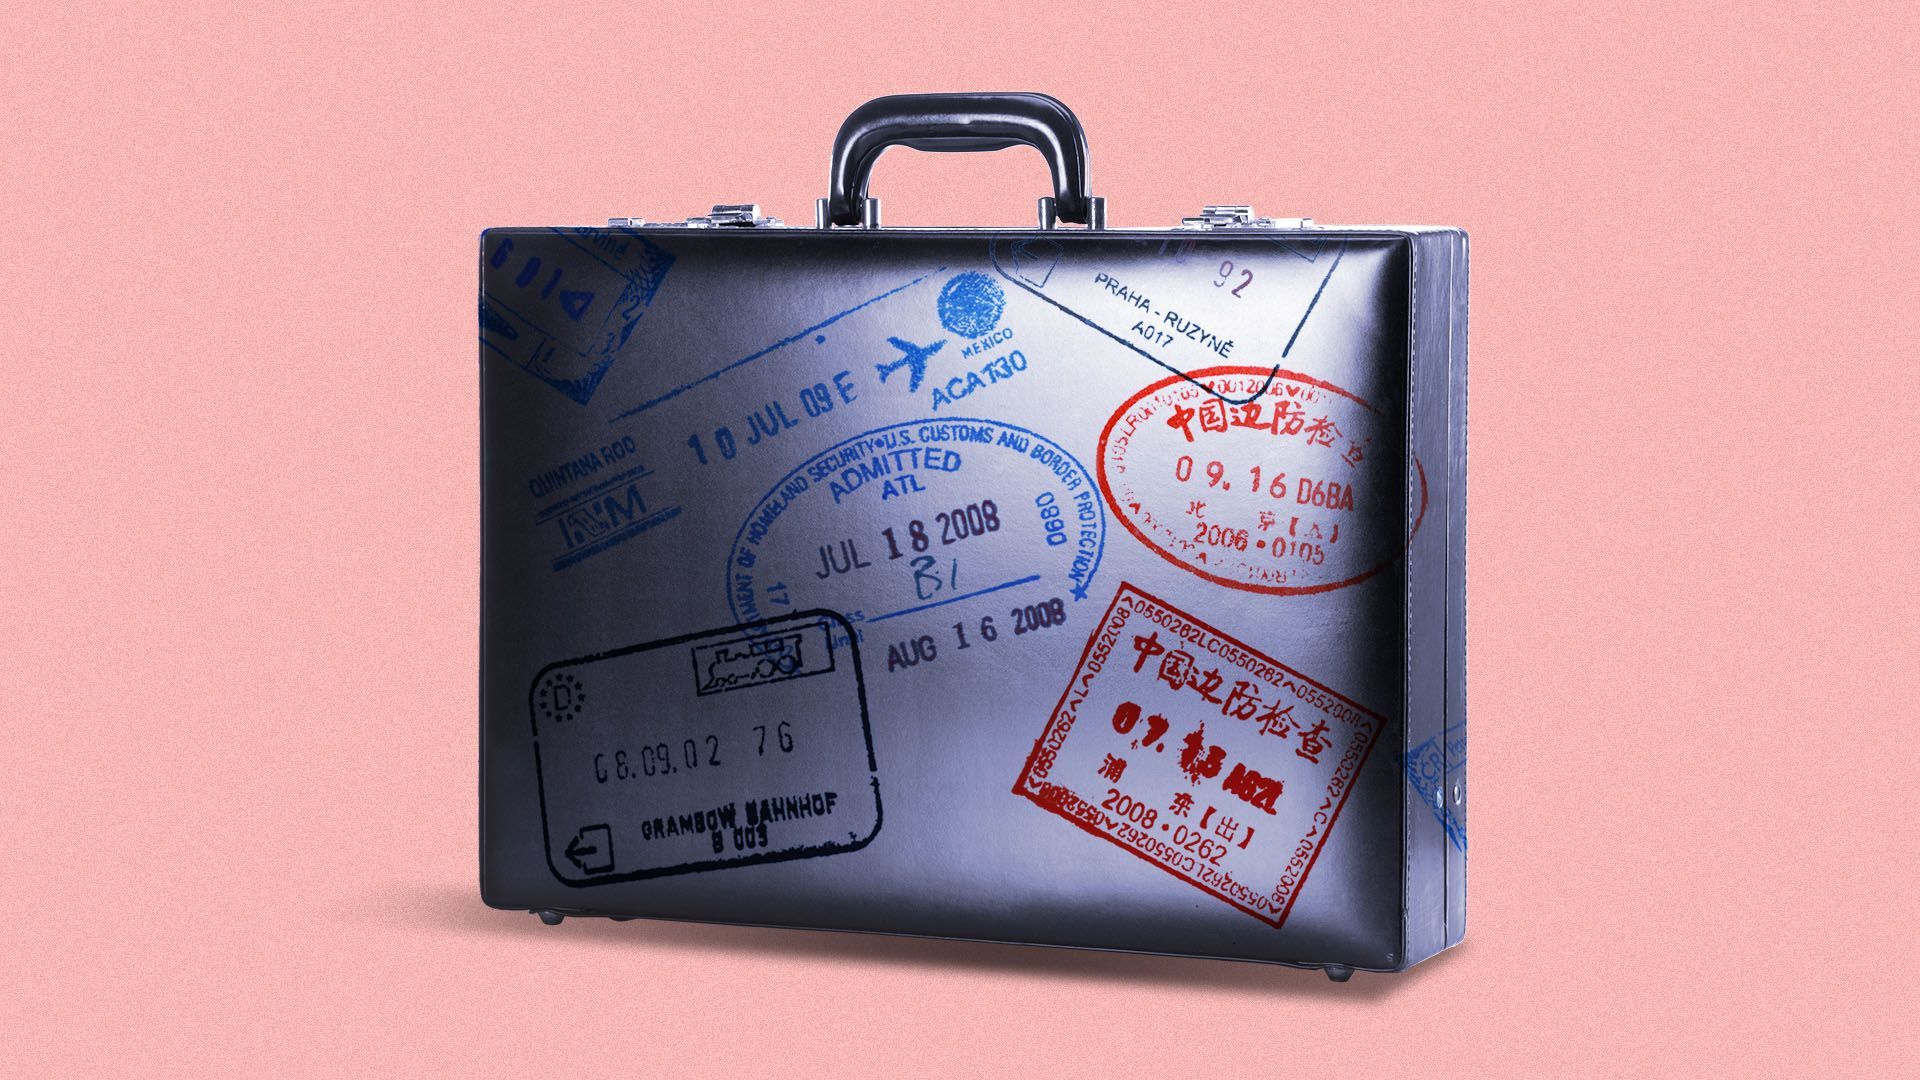 Illustration of a briefcase covered in passport stamps